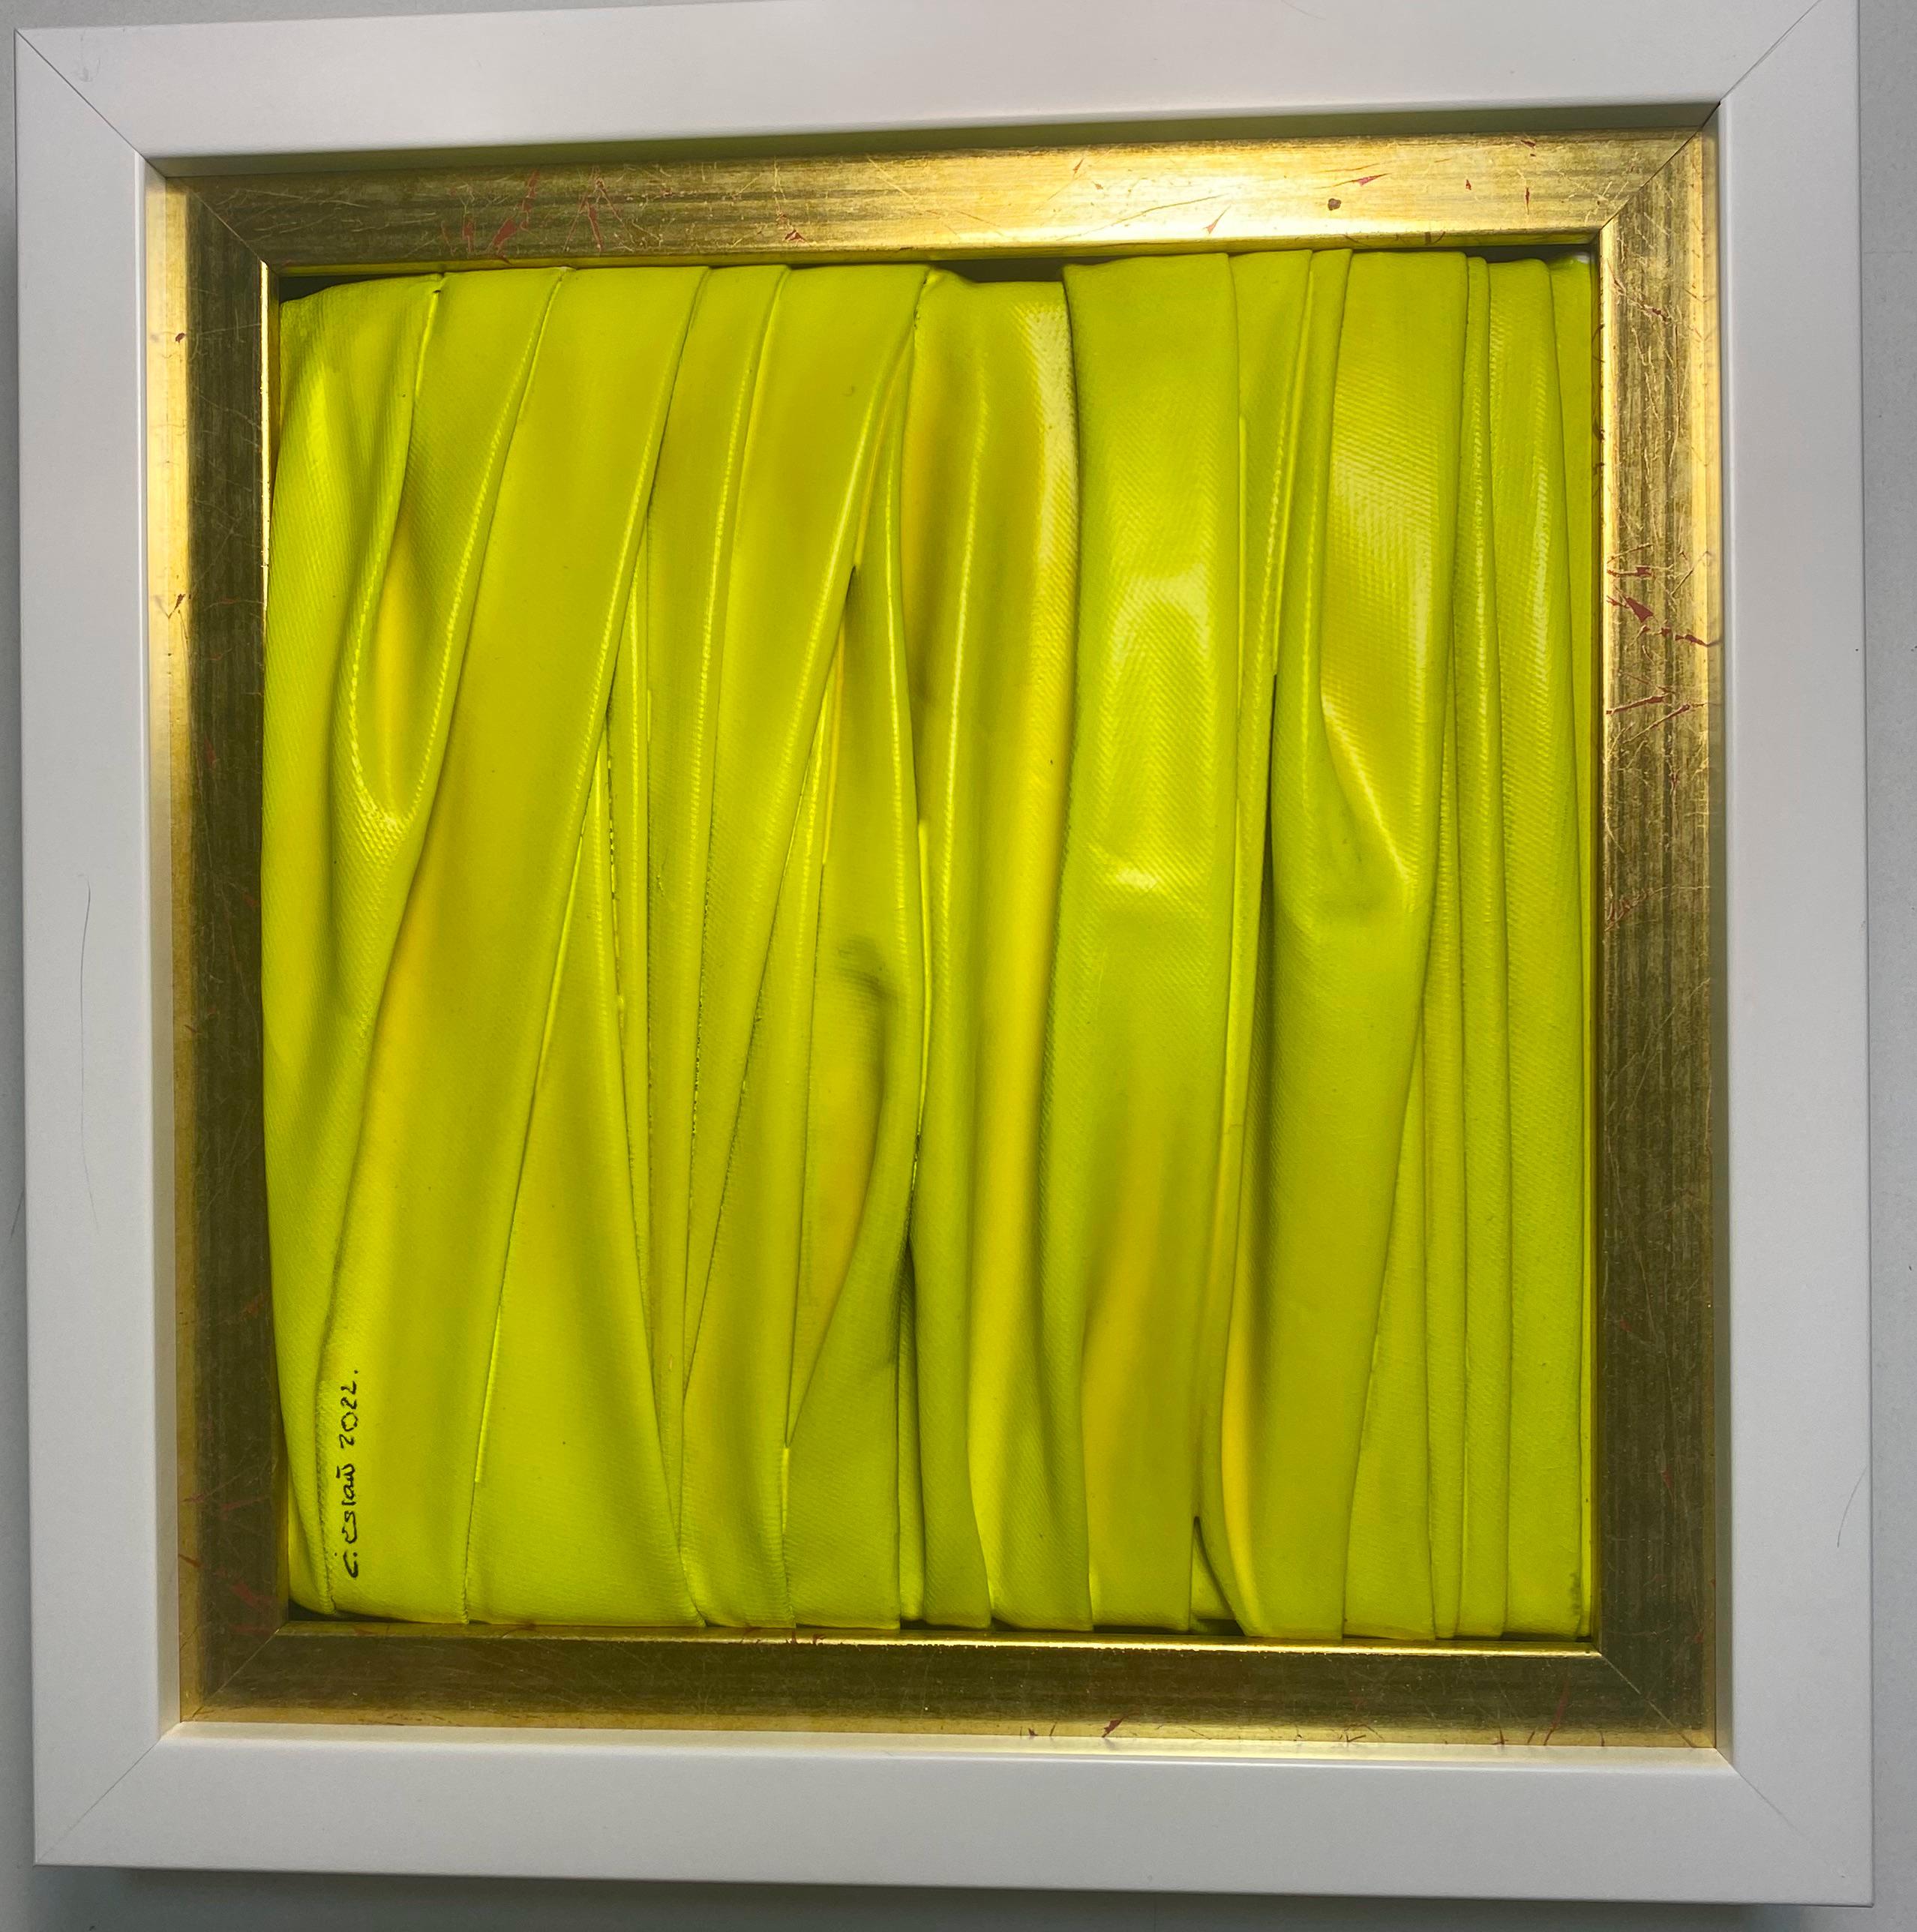 Cristina Estañ Abstract Painting - Contemporary Collage, Fluorescent Neon Yellow Color. Framed in Gold & White